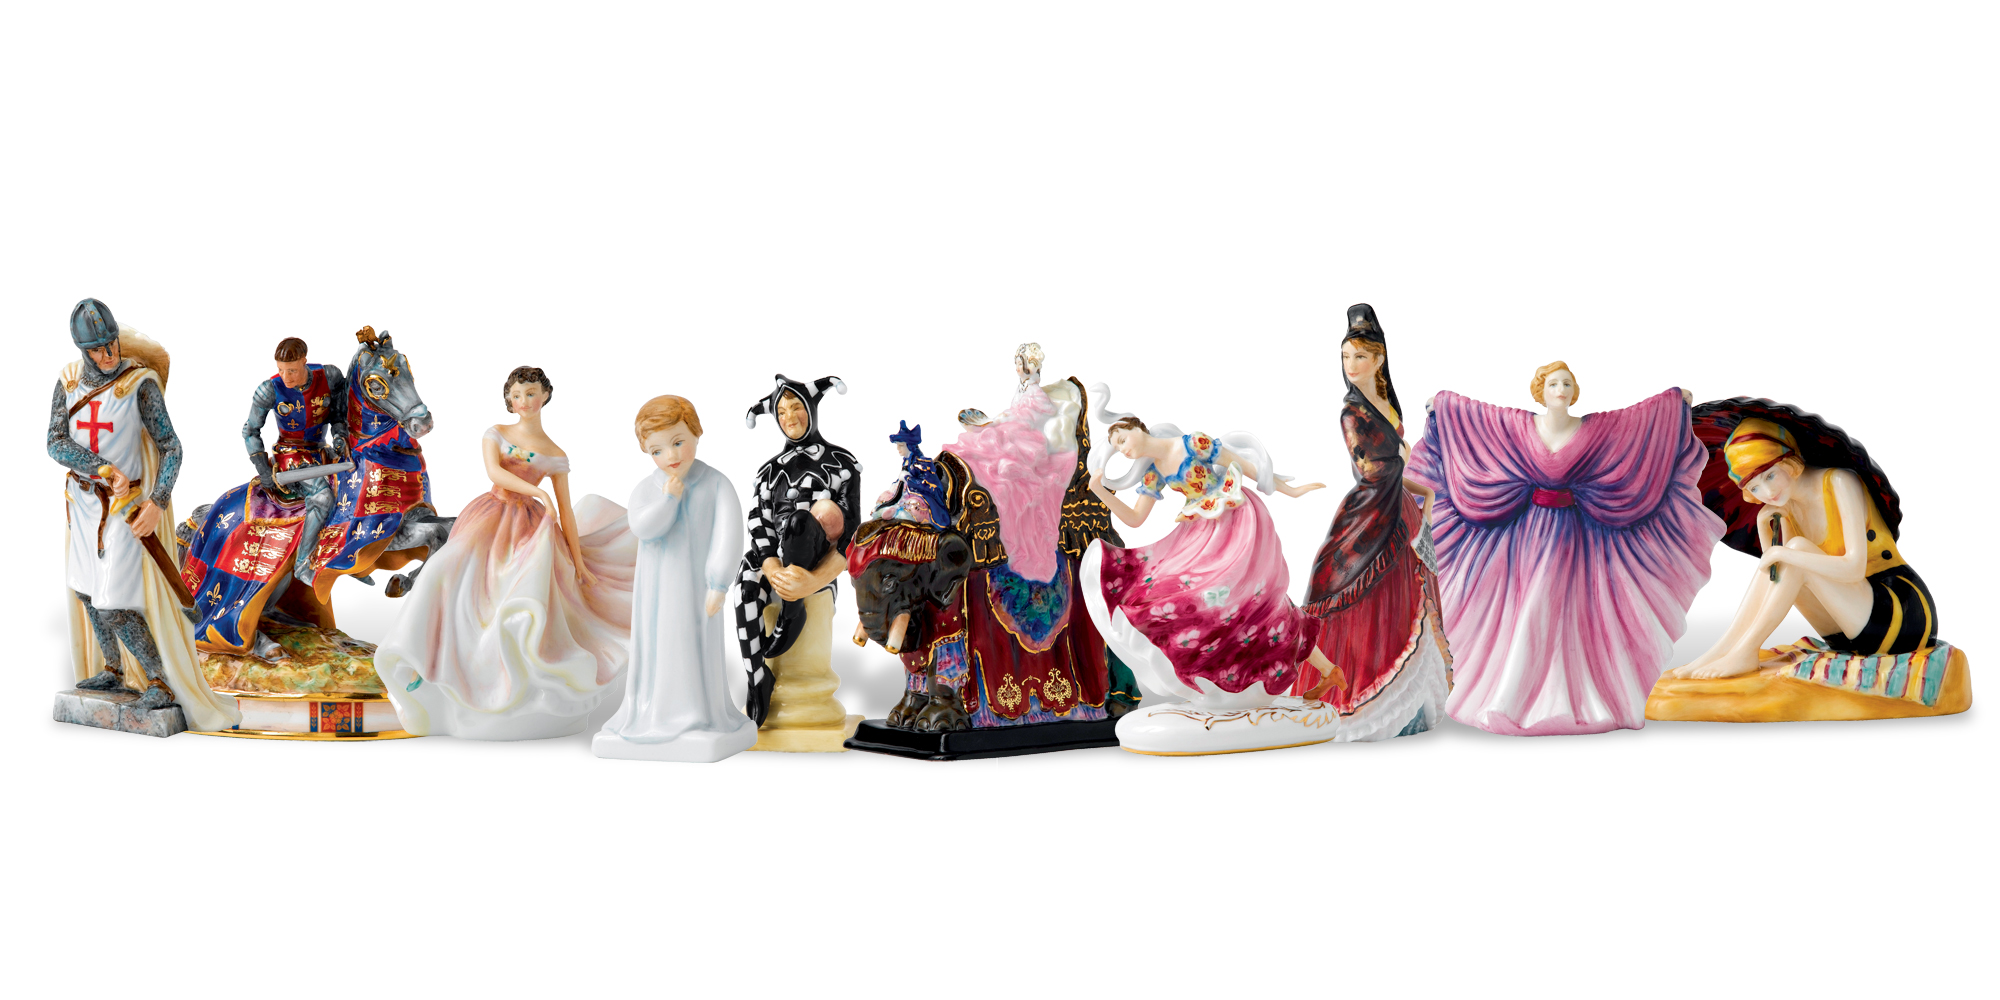 Set of 10 Miniature Figures - from HN Icons Collection - Royal Doulton Figurines